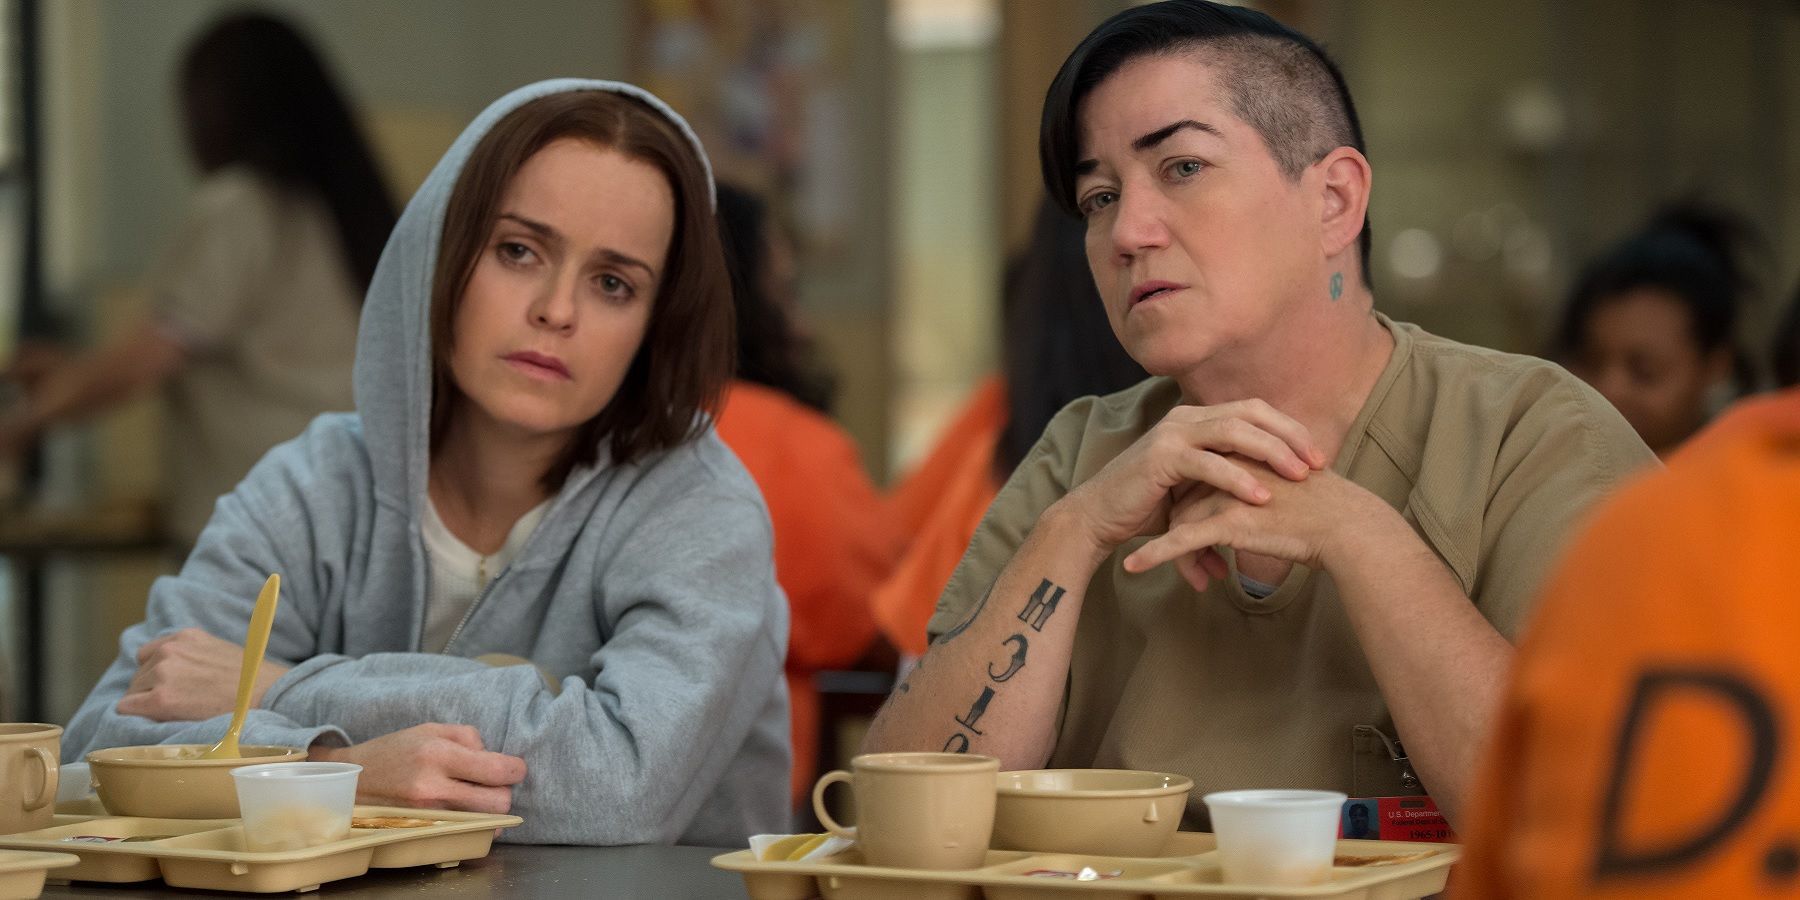 Pennsatucky and Big Boo in Orange is the New Black season 4